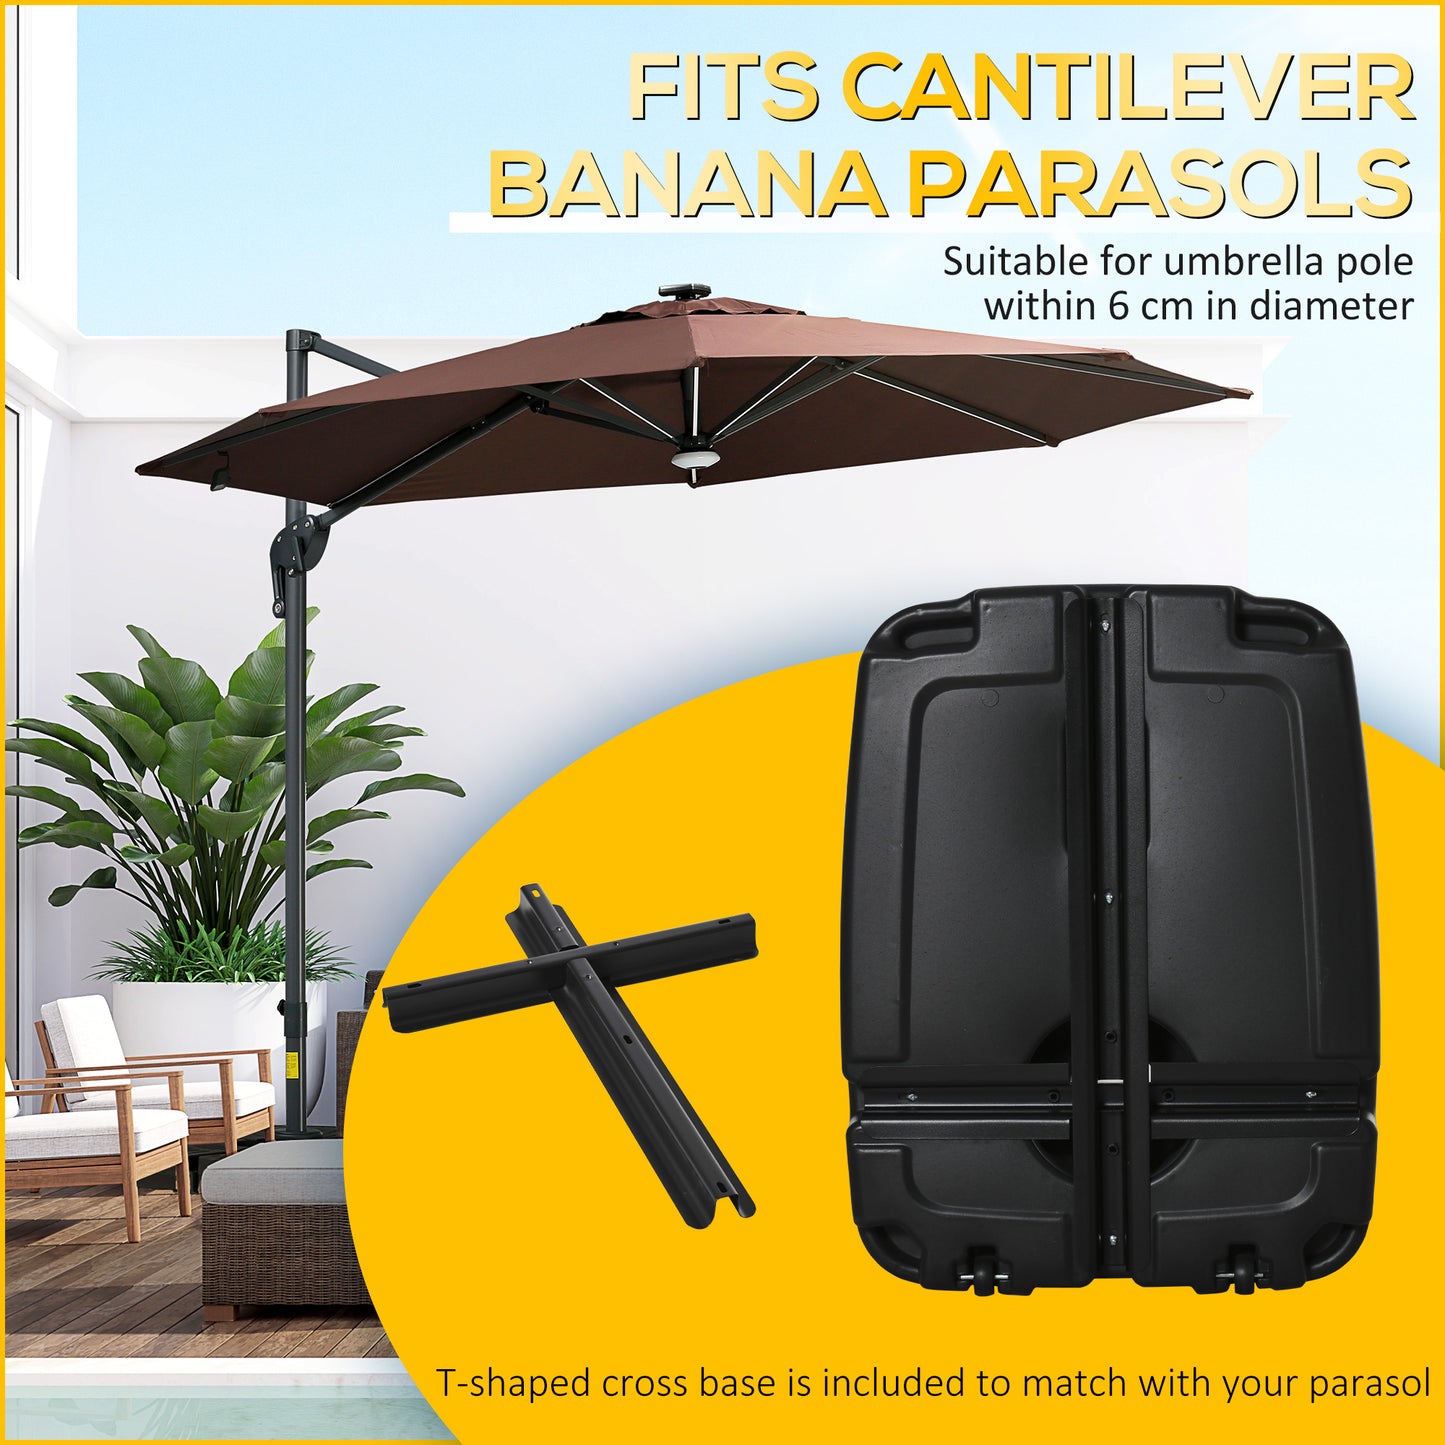 Outsunny 7.5kg Square Parasol Base Portable Umbrella Stand Weights for Cantilever Banana Parasol with Wheels, Water and Sand Filled, Up to 100kg, Black